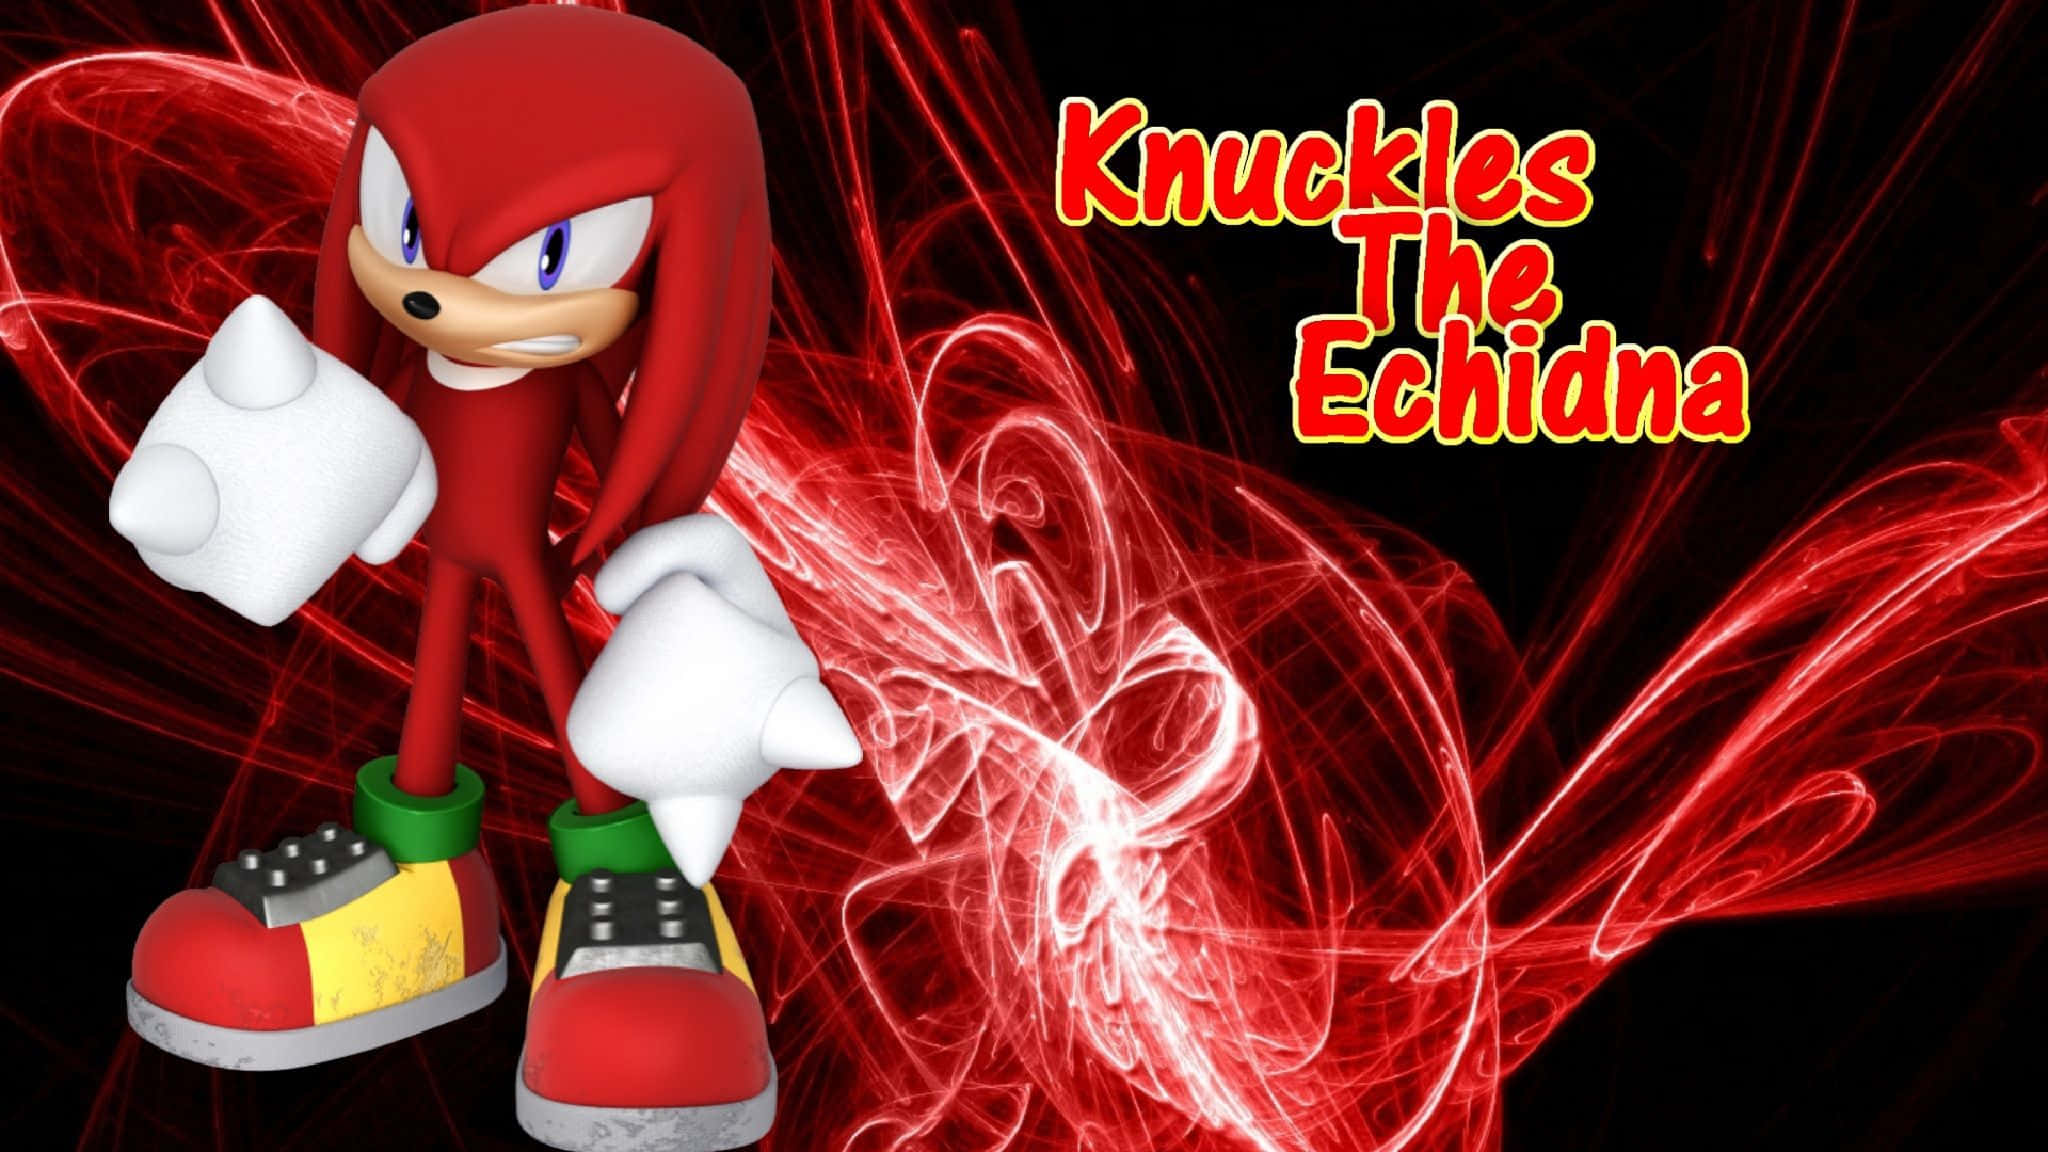 "Knuckles the Echidna is prepared for battle." Wallpaper